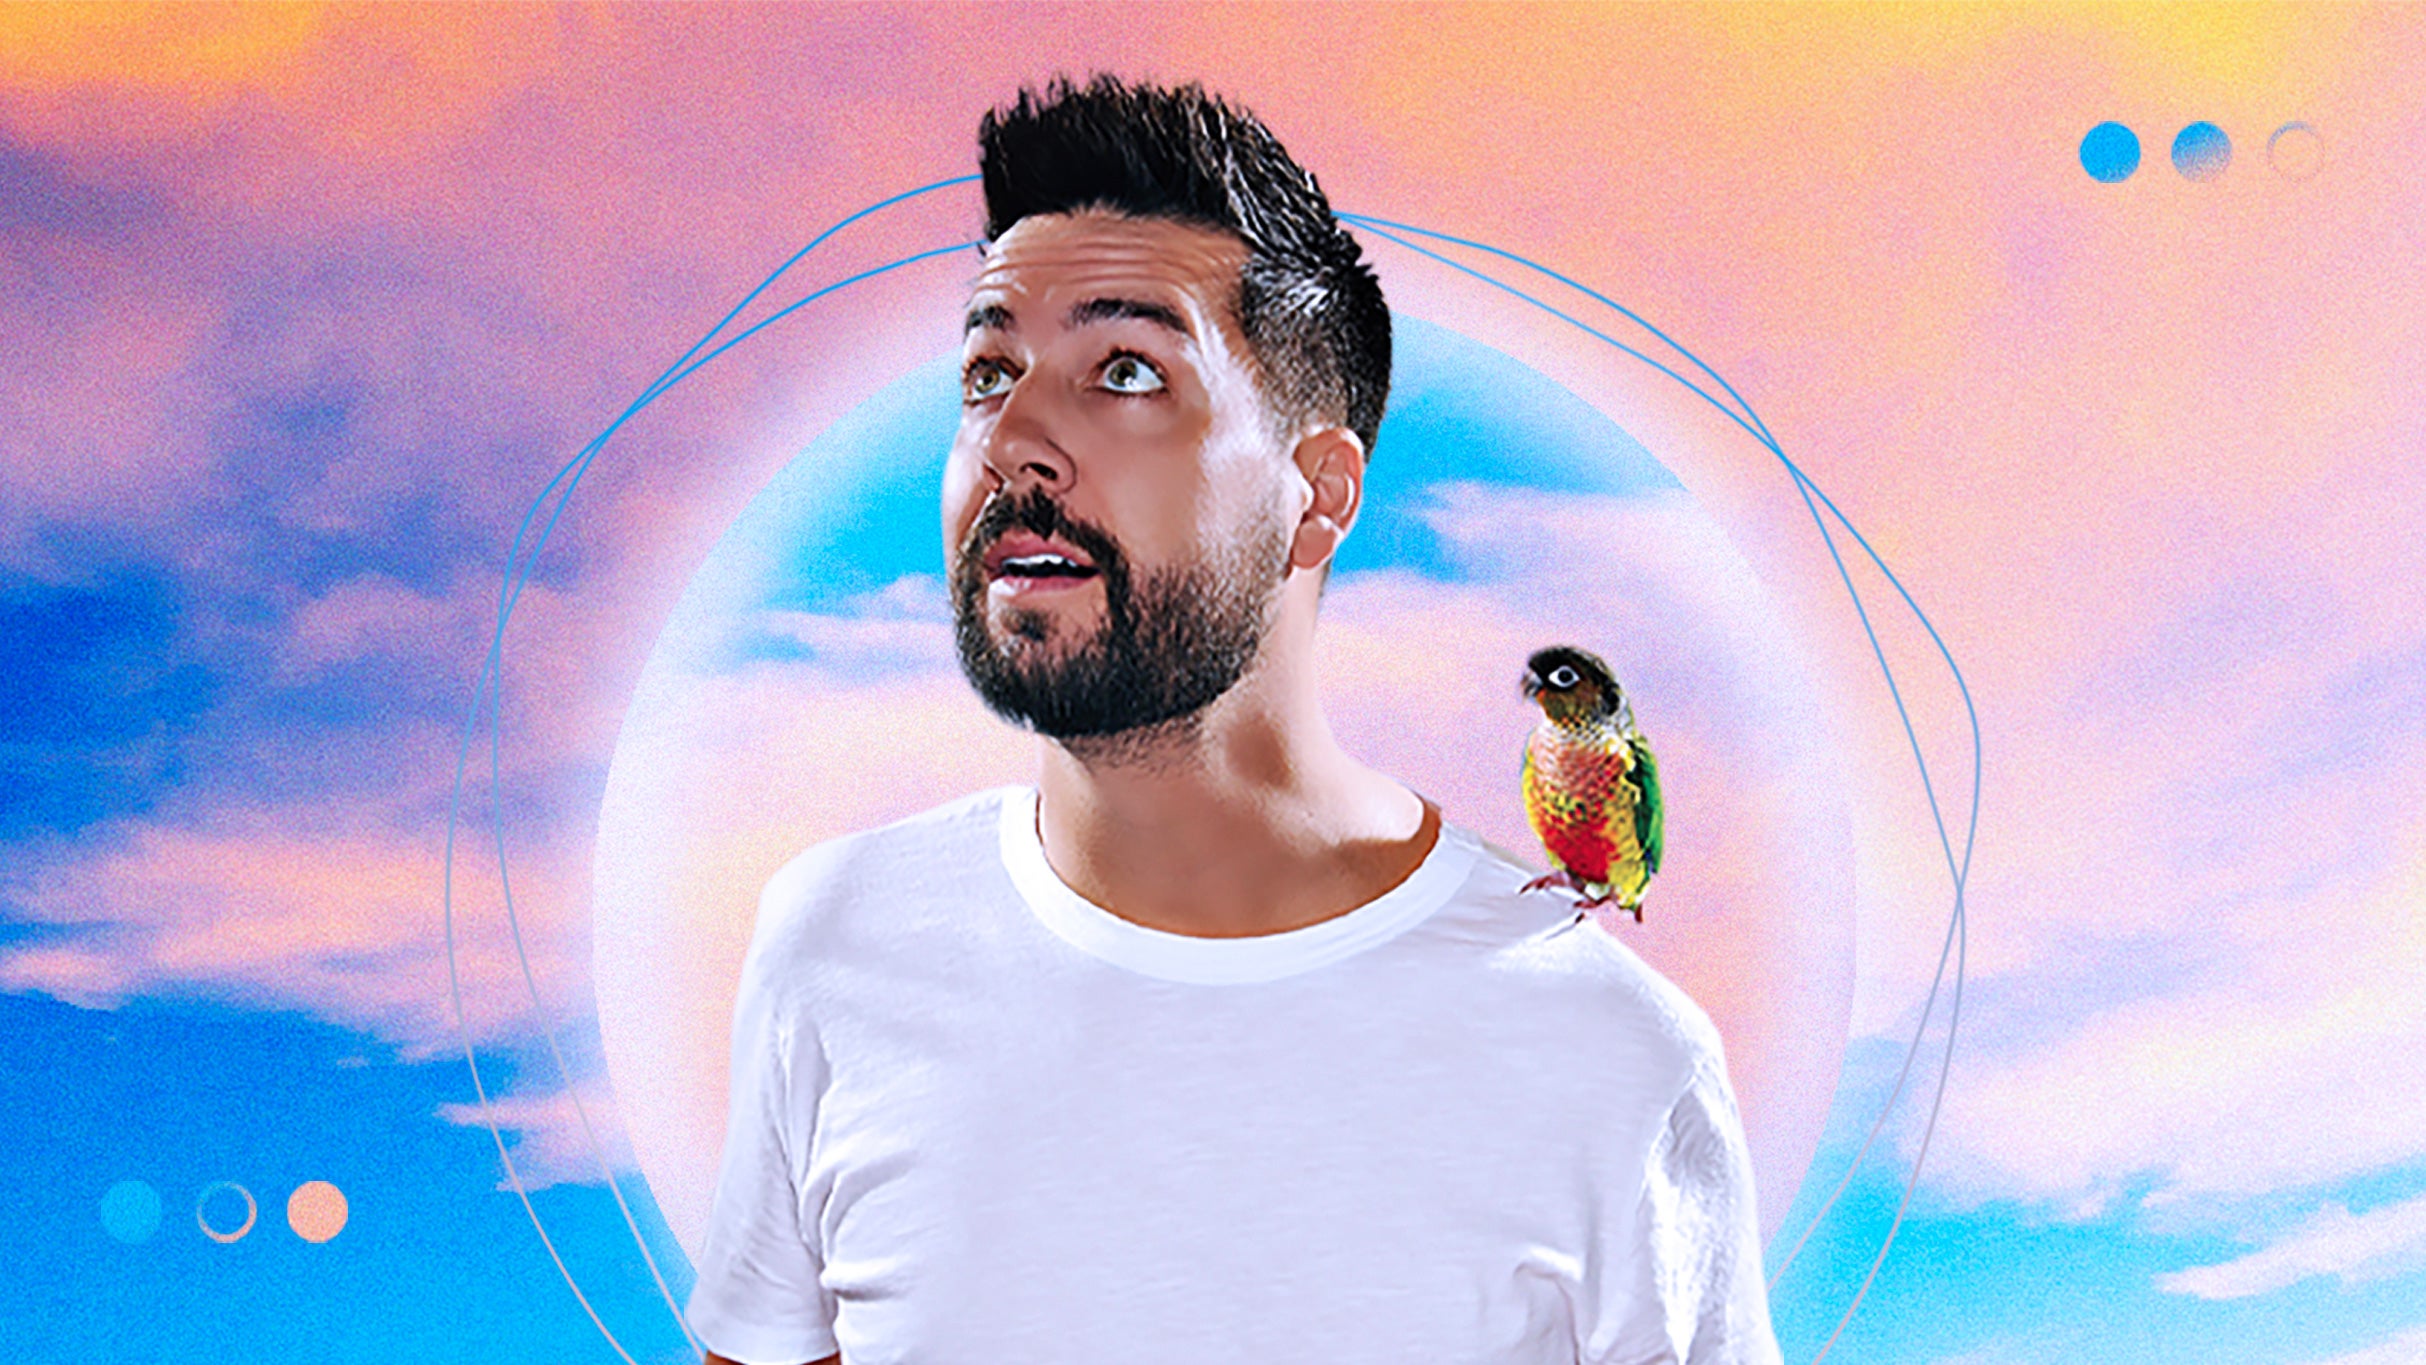 John Crist: The Emotional Support Tour at The Lyric